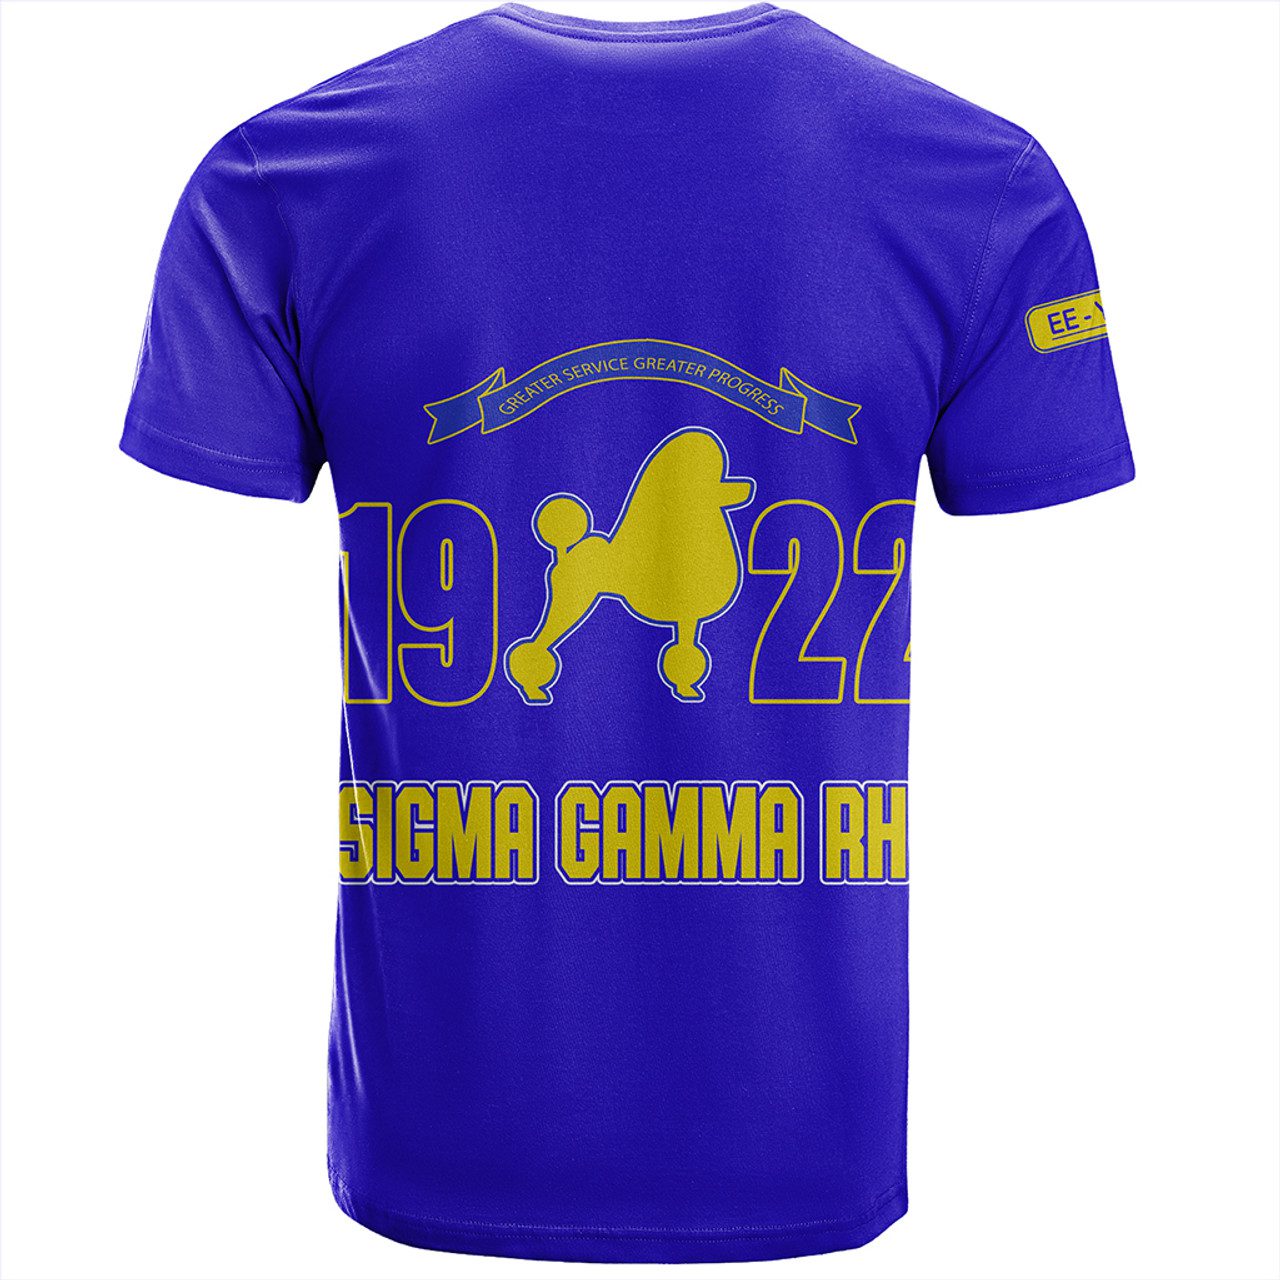 Sigma Gamma Rho T-Shirt Greater Service And Greater Progress